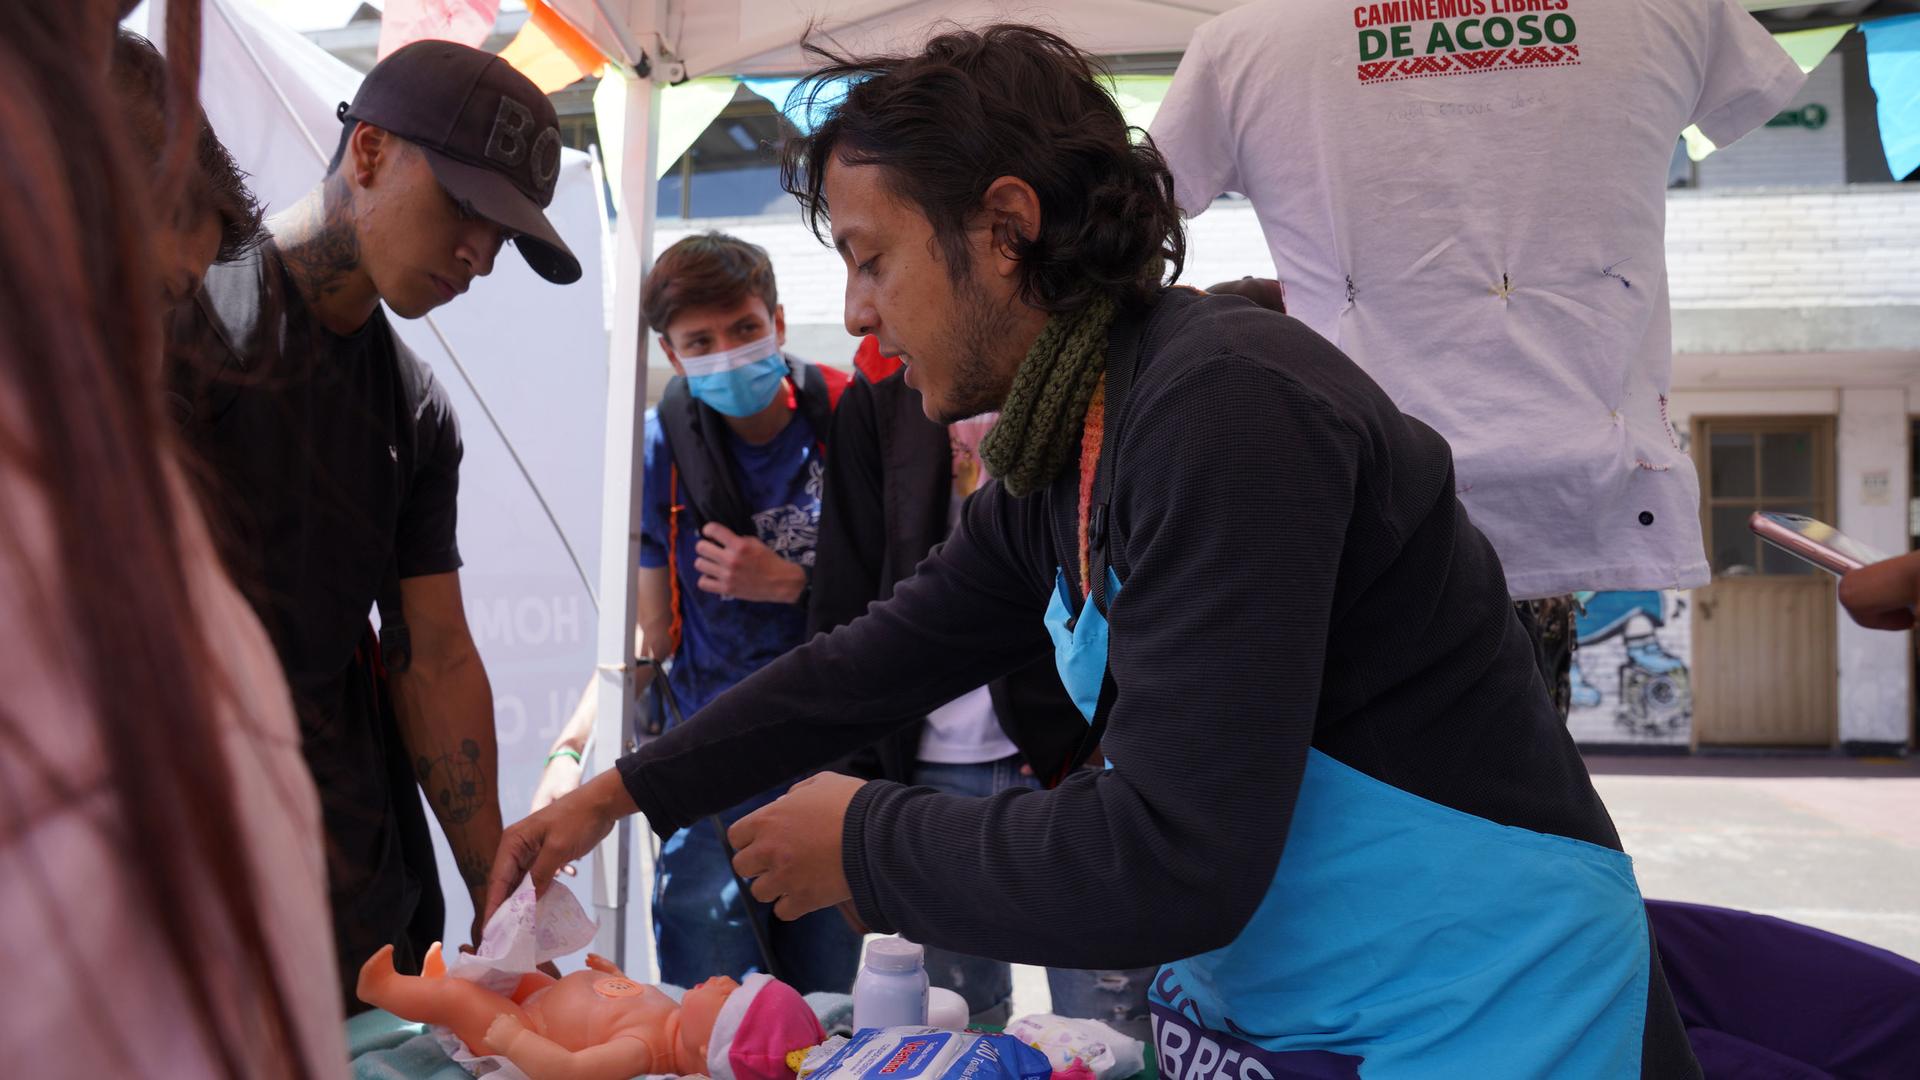 At a job fair in Bogotá, psychologist Nicolas Londoño showed groups of young men how to change a baby's diapers.  Londoño works with Care School for Men, an educational program funded by the city government. 